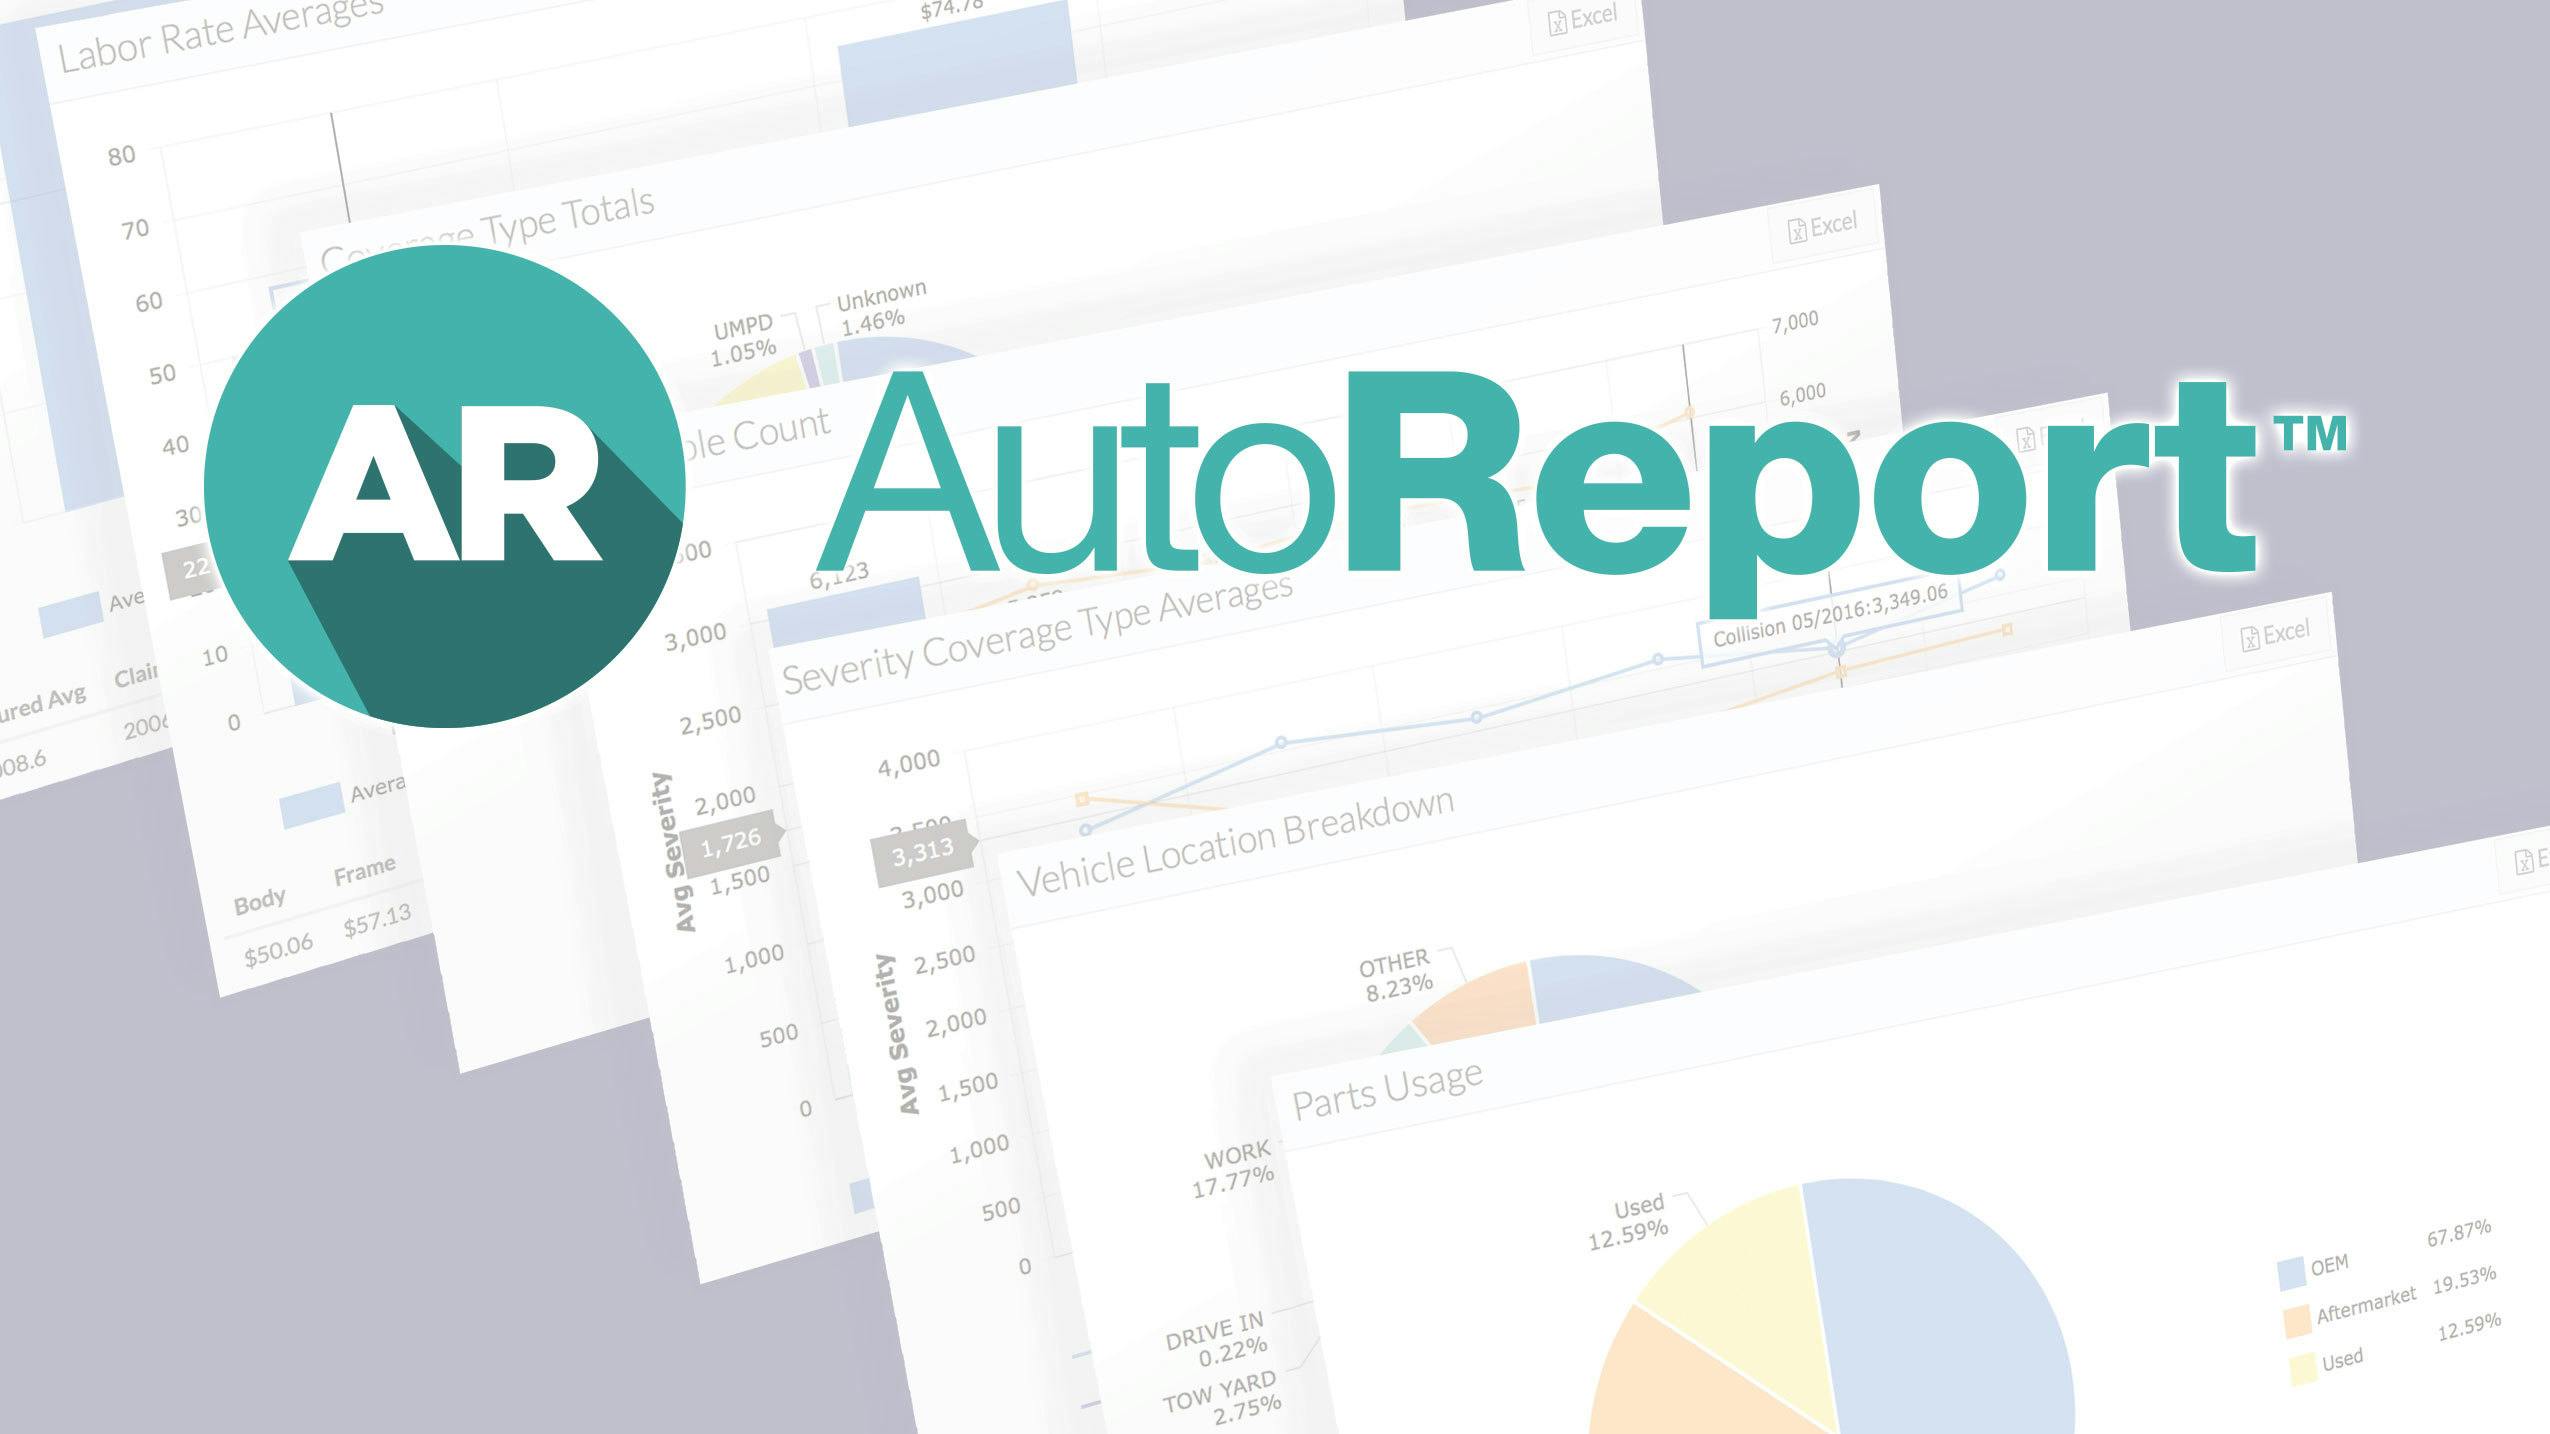 ACD‘s AutoLink Now Featuring Premium Reporting